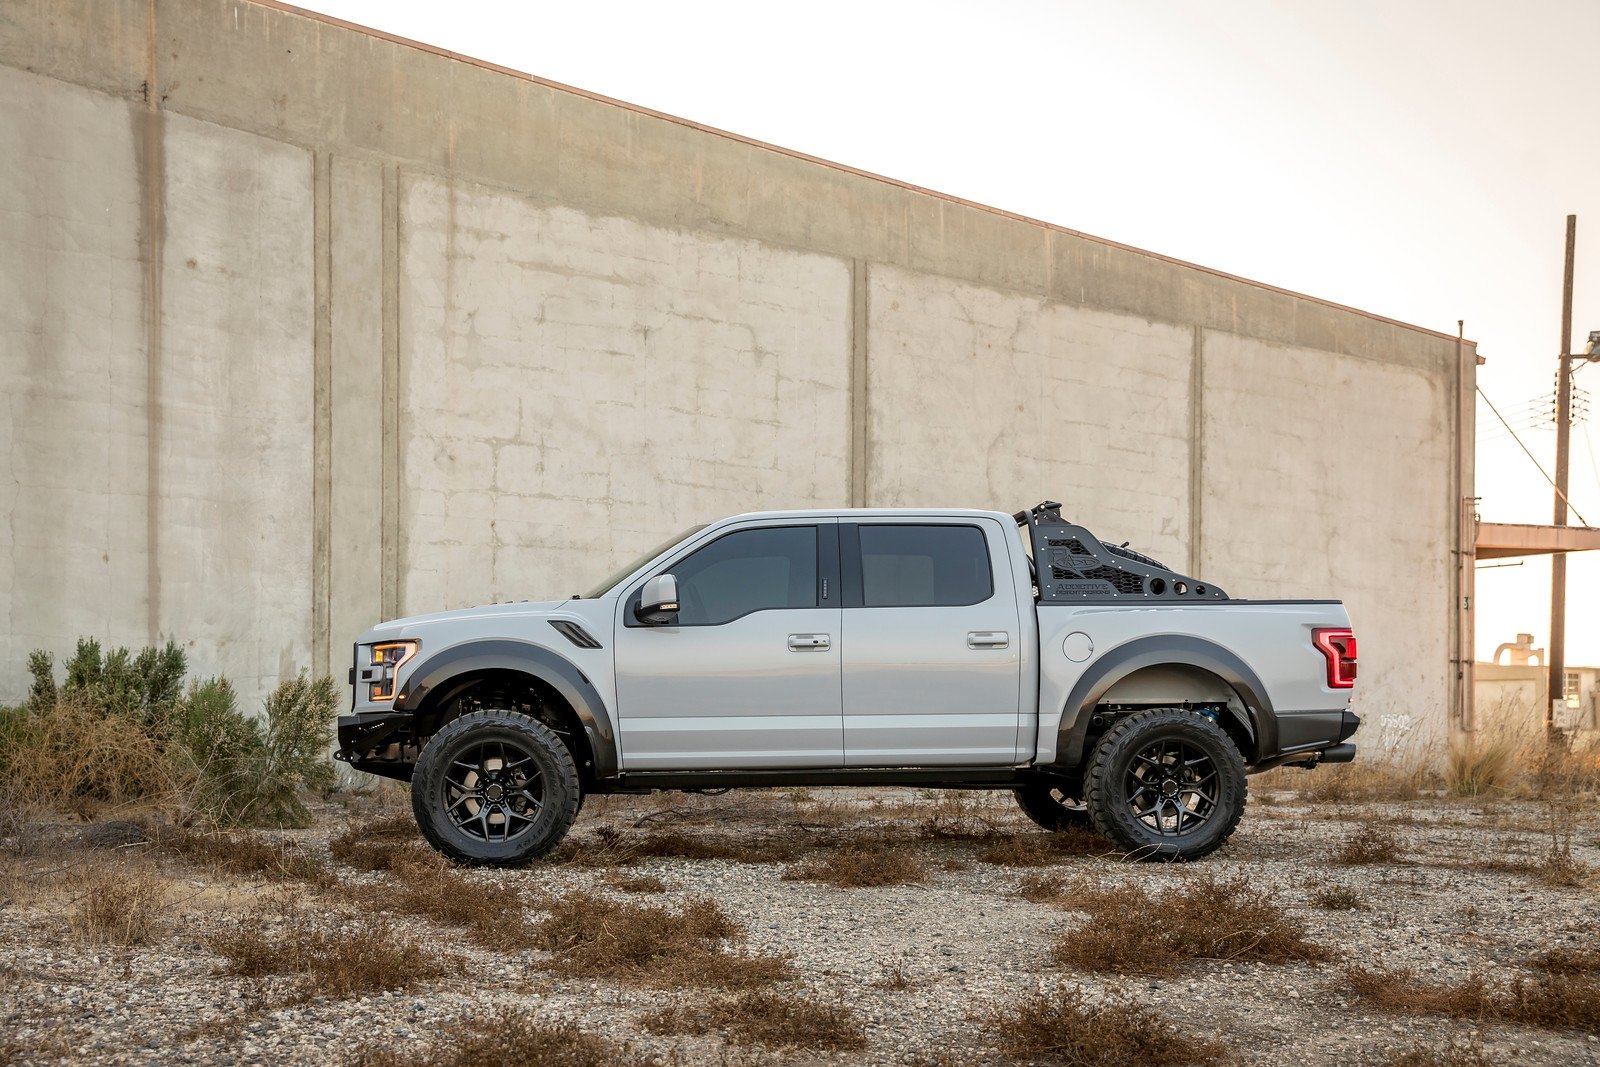 White Lifted Ford F-150 with Custom Fender Flares - Photo by Venom Rex